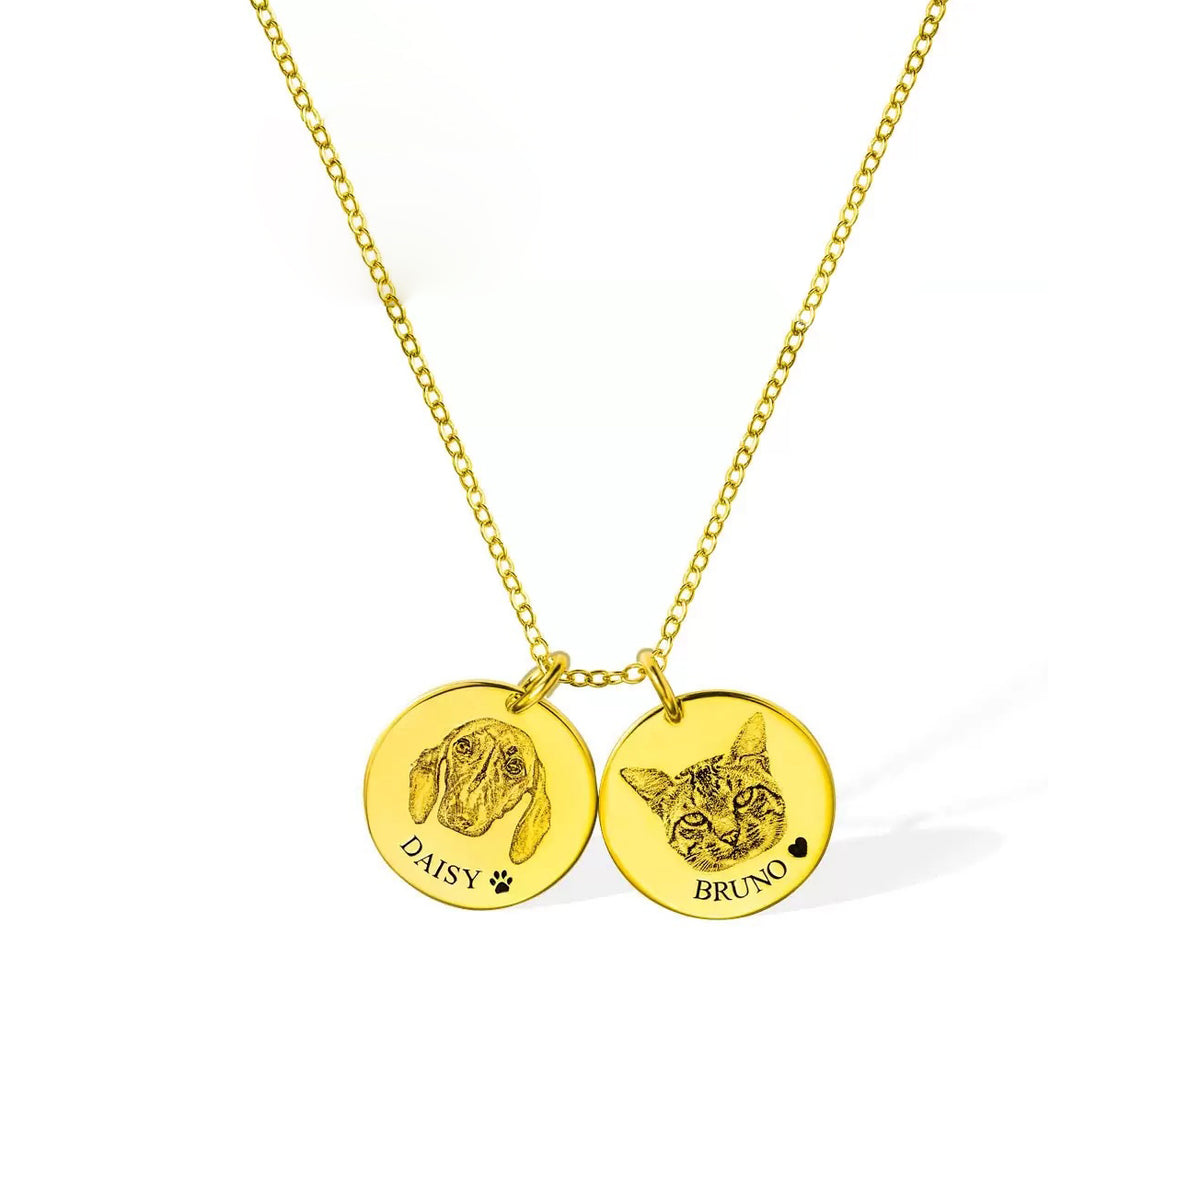 Personalised Pet Multi Disc Necklace